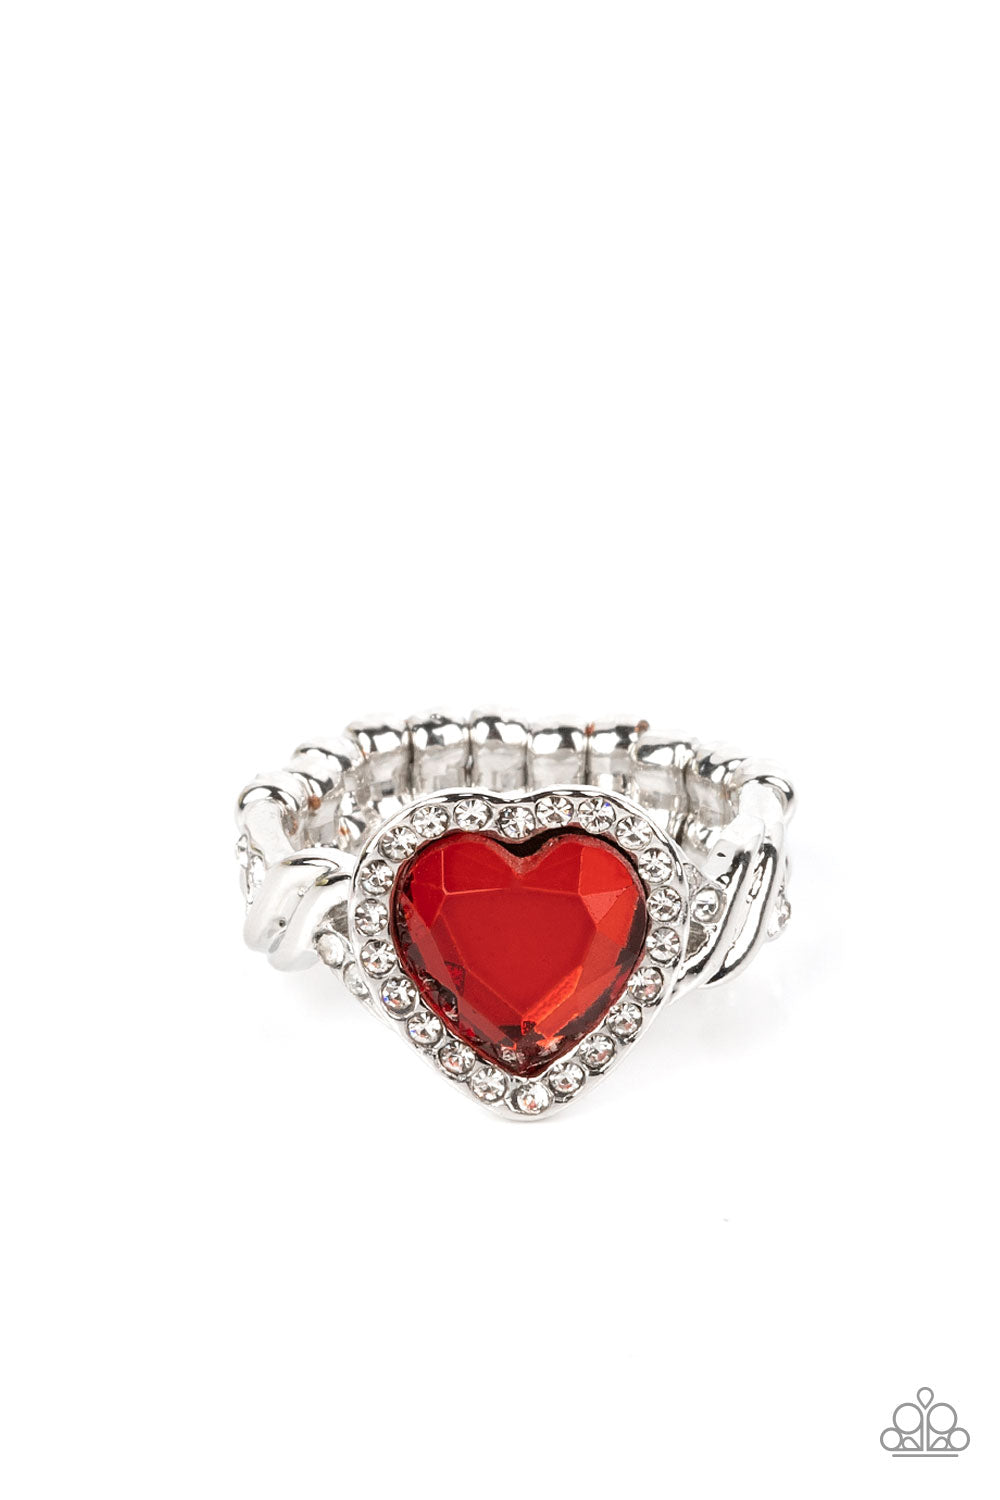 five-dollar-jewelry-committed-to-cupid-red-paparazzi-accessories